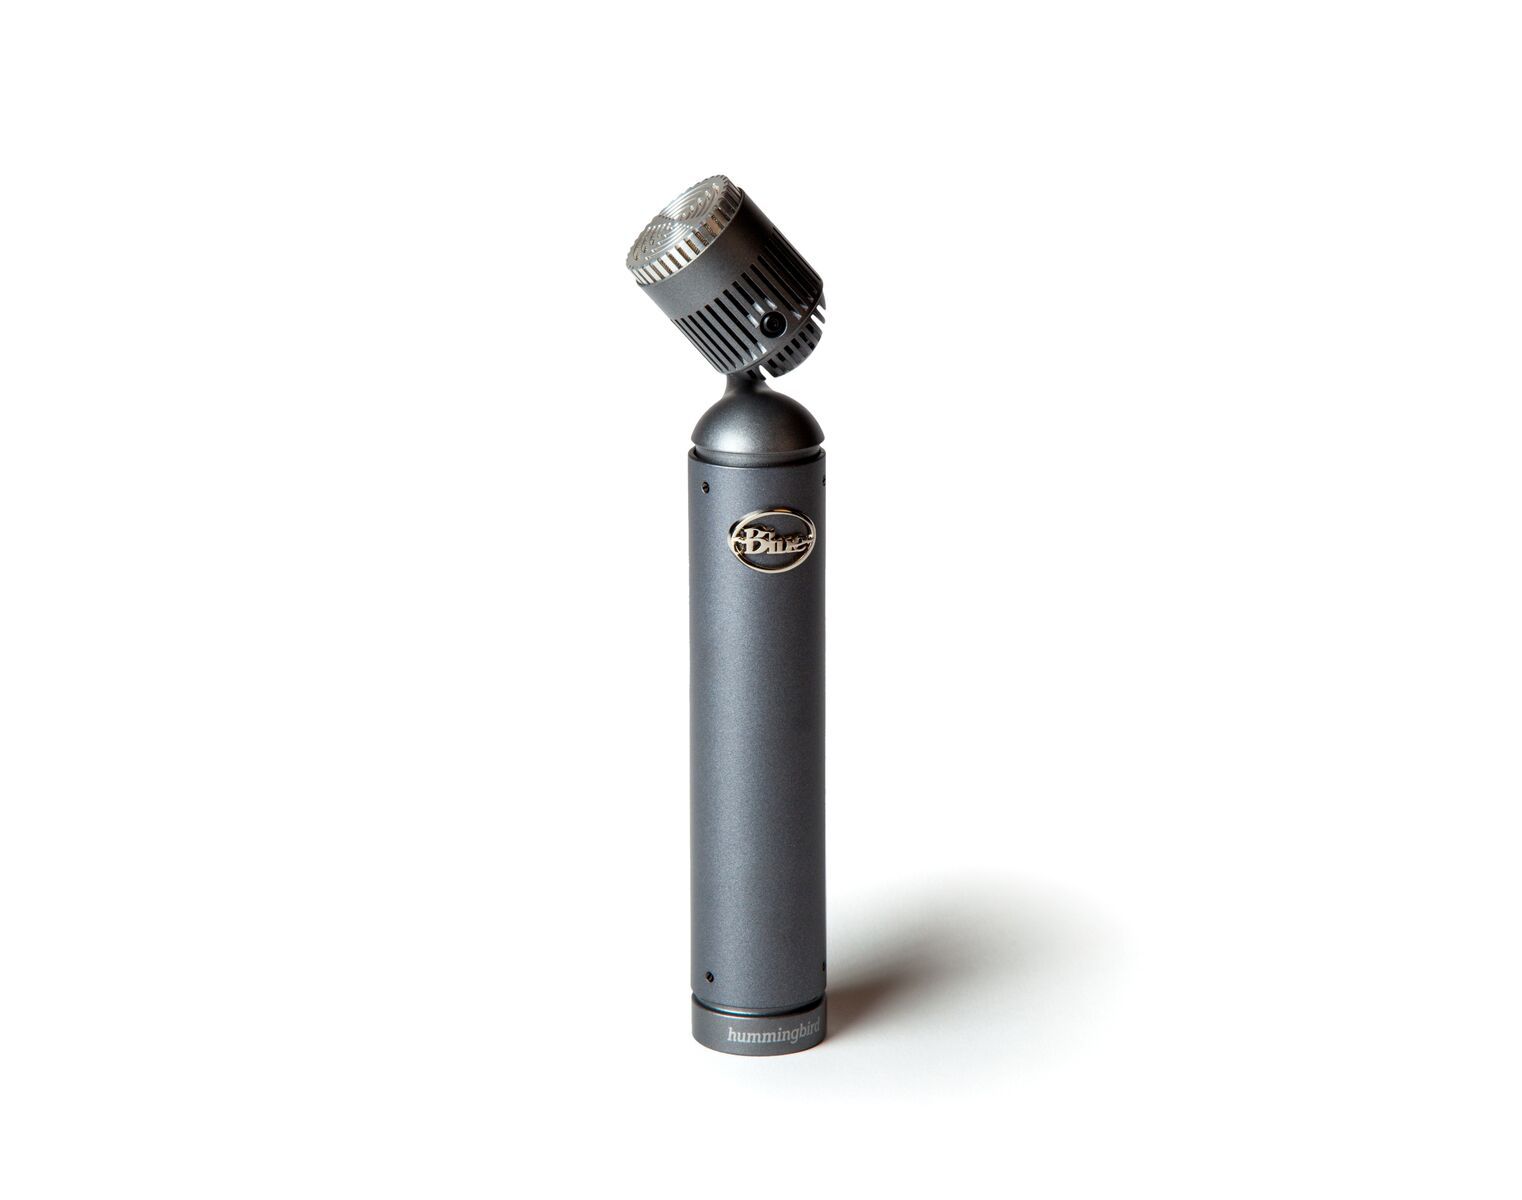 Blue Microphones Hummingbird Front: The capsule rotates 180 degrees for flexibility in mic placement.